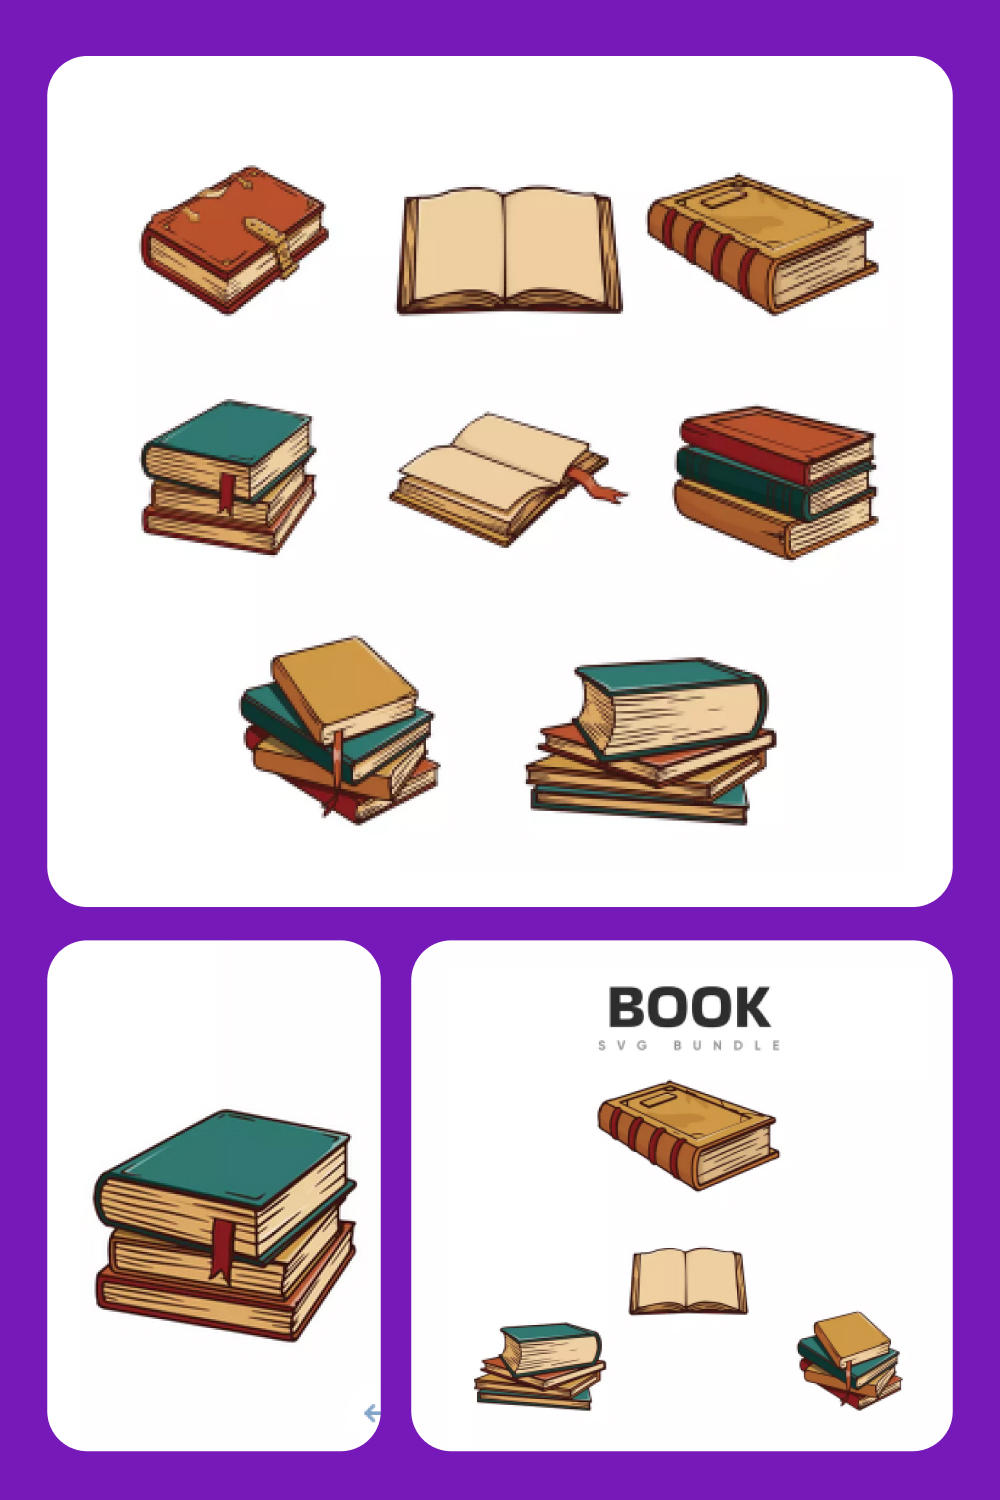 Collage of drawn images of open and closed books.